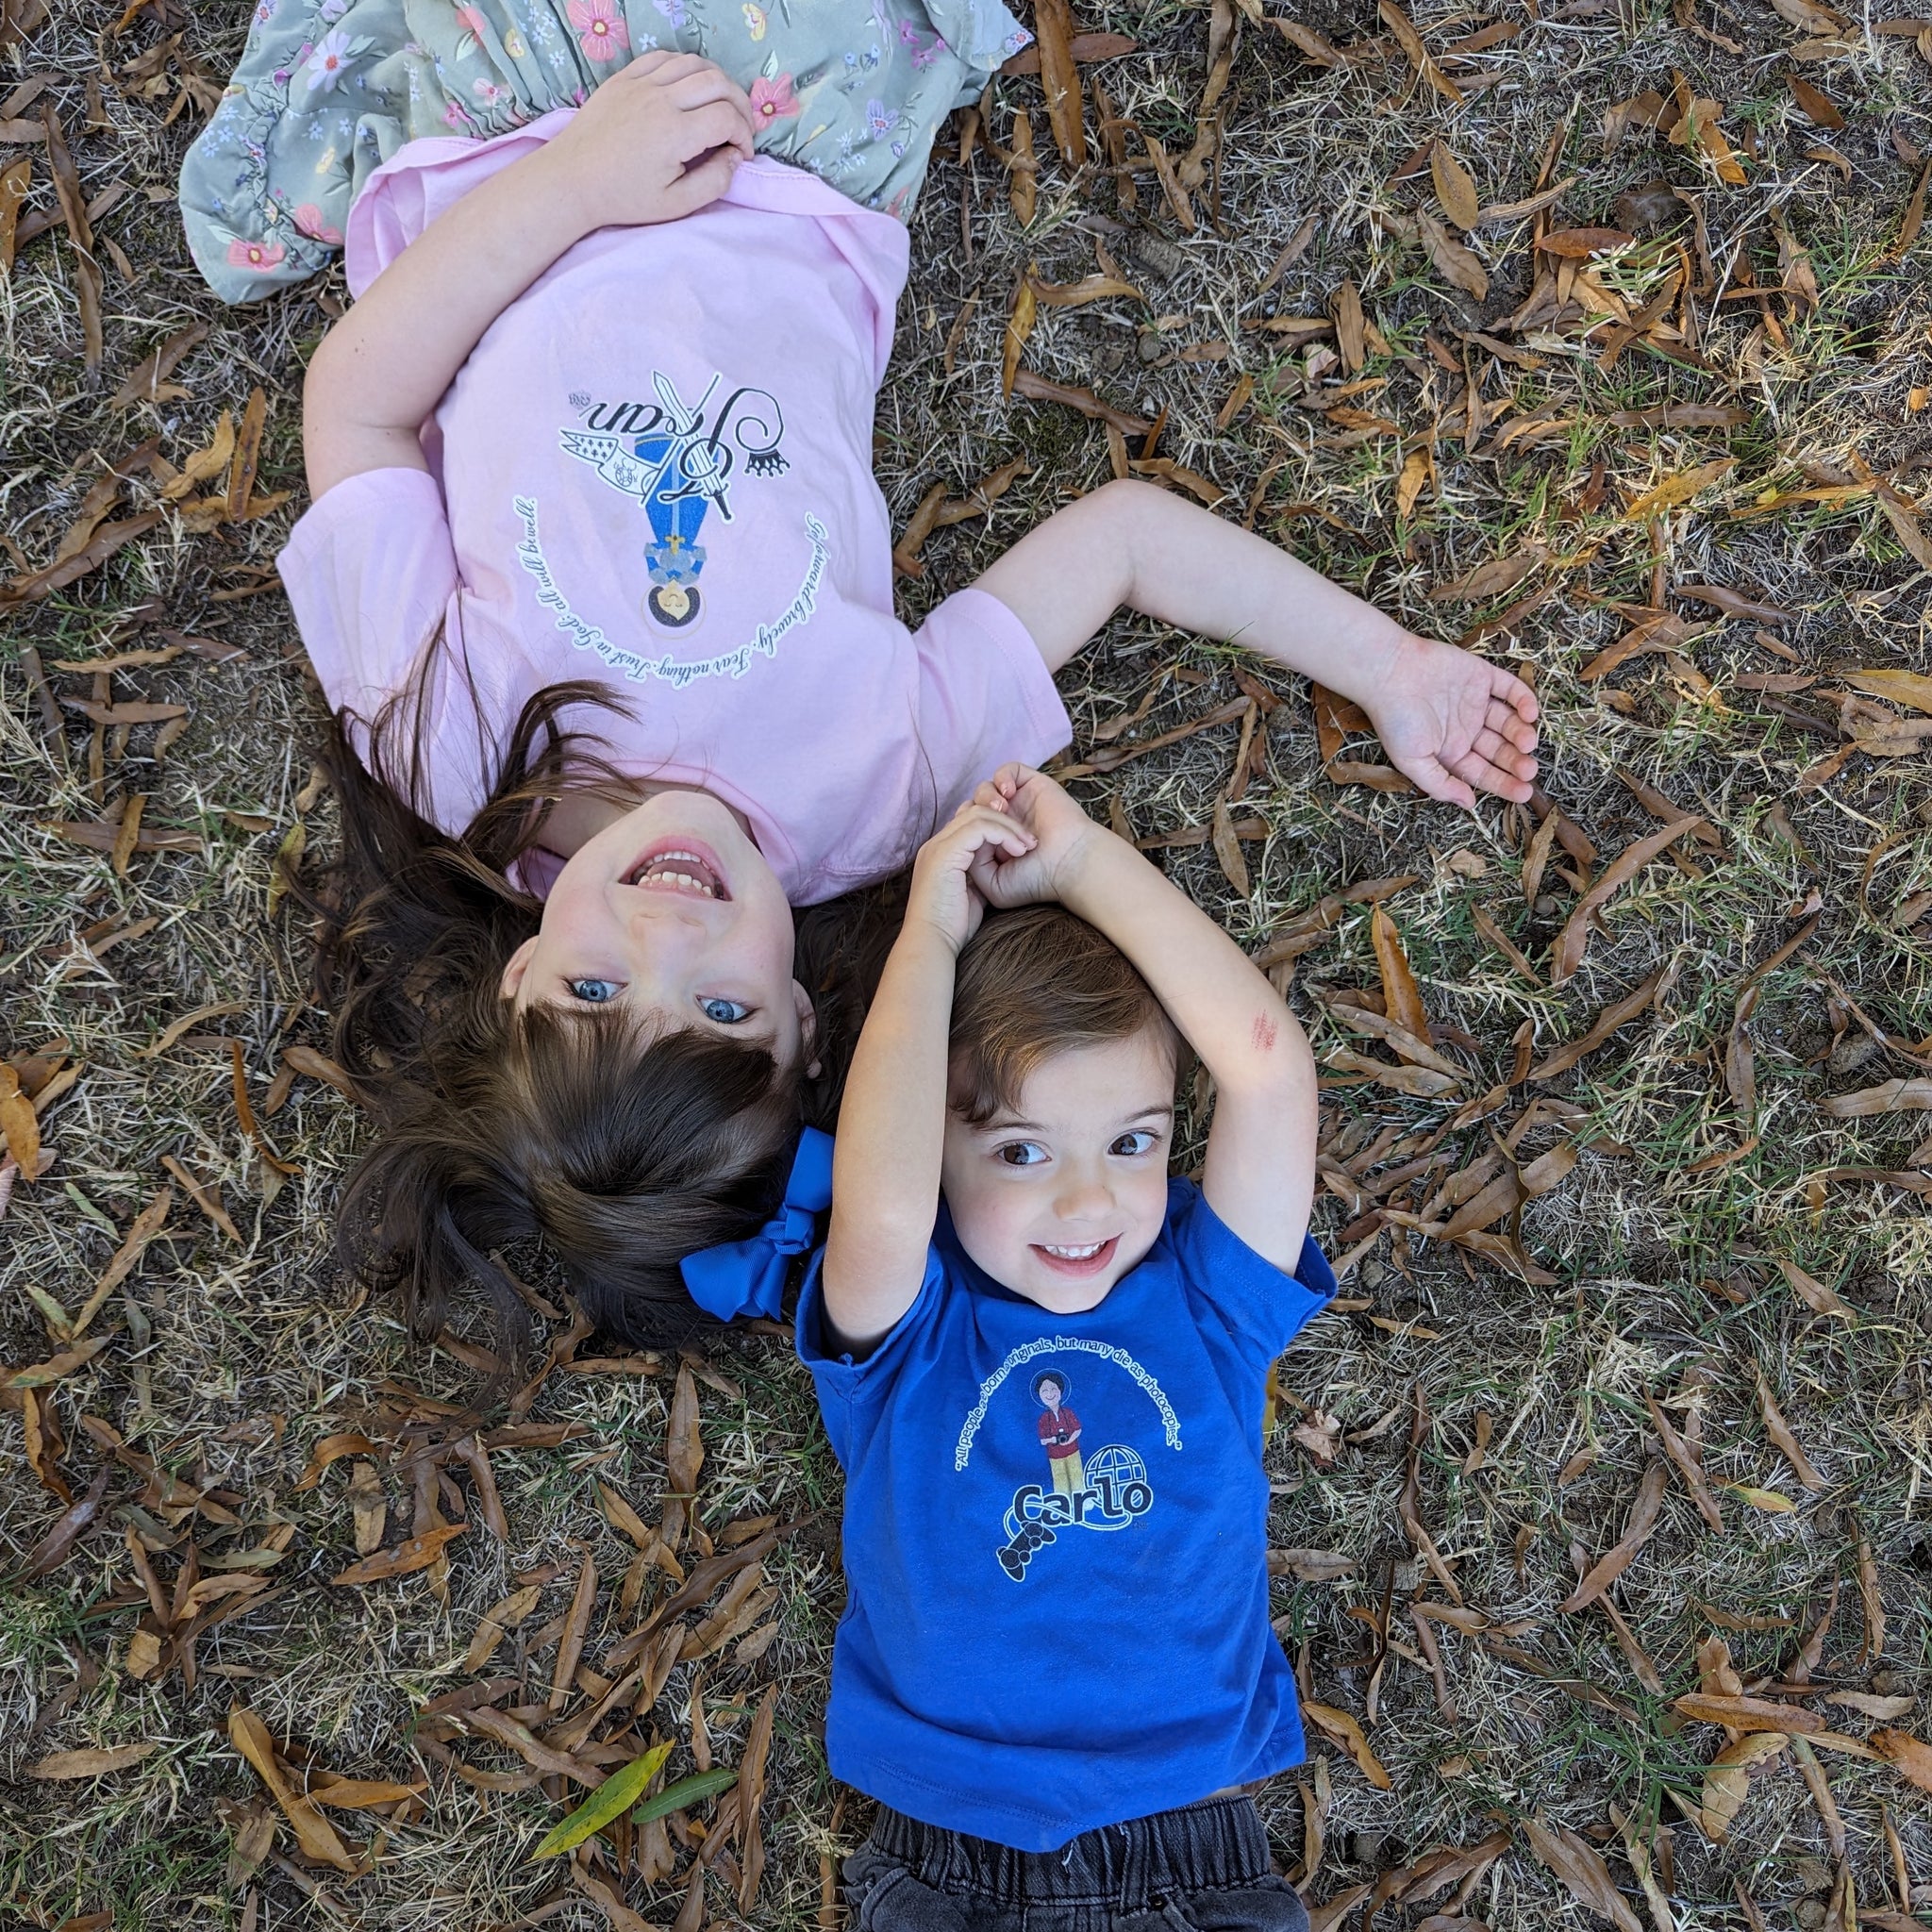 A boy and girl lying on the ground looking up at the camera. The boy is wearing a Bl. Carlo Acutis blue shirt and the girl is wearing a pink St. Joan of Arc shirt.